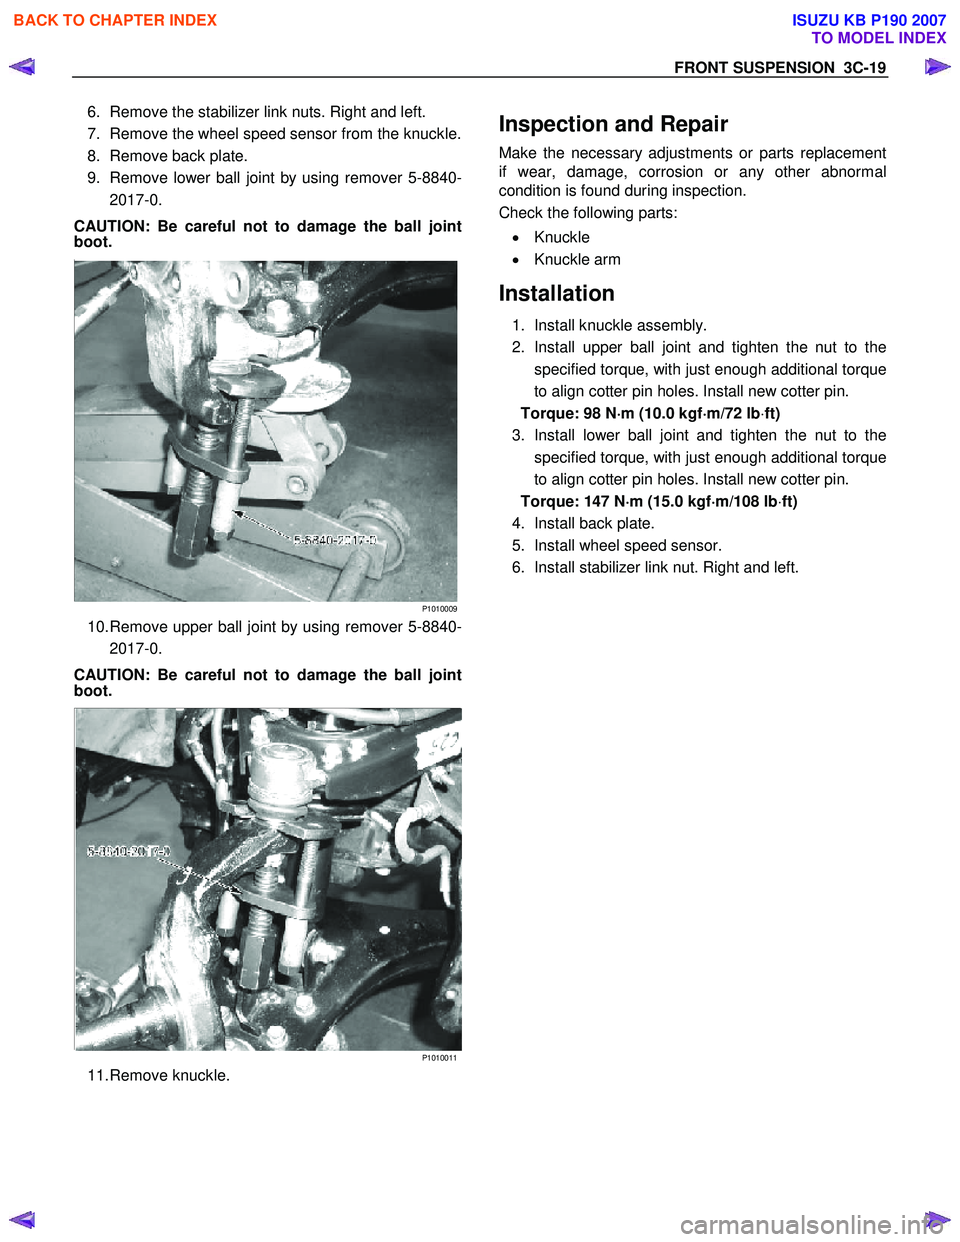 ISUZU KB P190 2007  Workshop Repair Manual FRONT SUSPENSION  3C-19 
6.  Remove the stabilizer link nuts. Right and left.  
7.  Remove the wheel speed sensor from the knuckle. 
8.  Remove back plate. 
9.  Remove lower ball joint by using remove